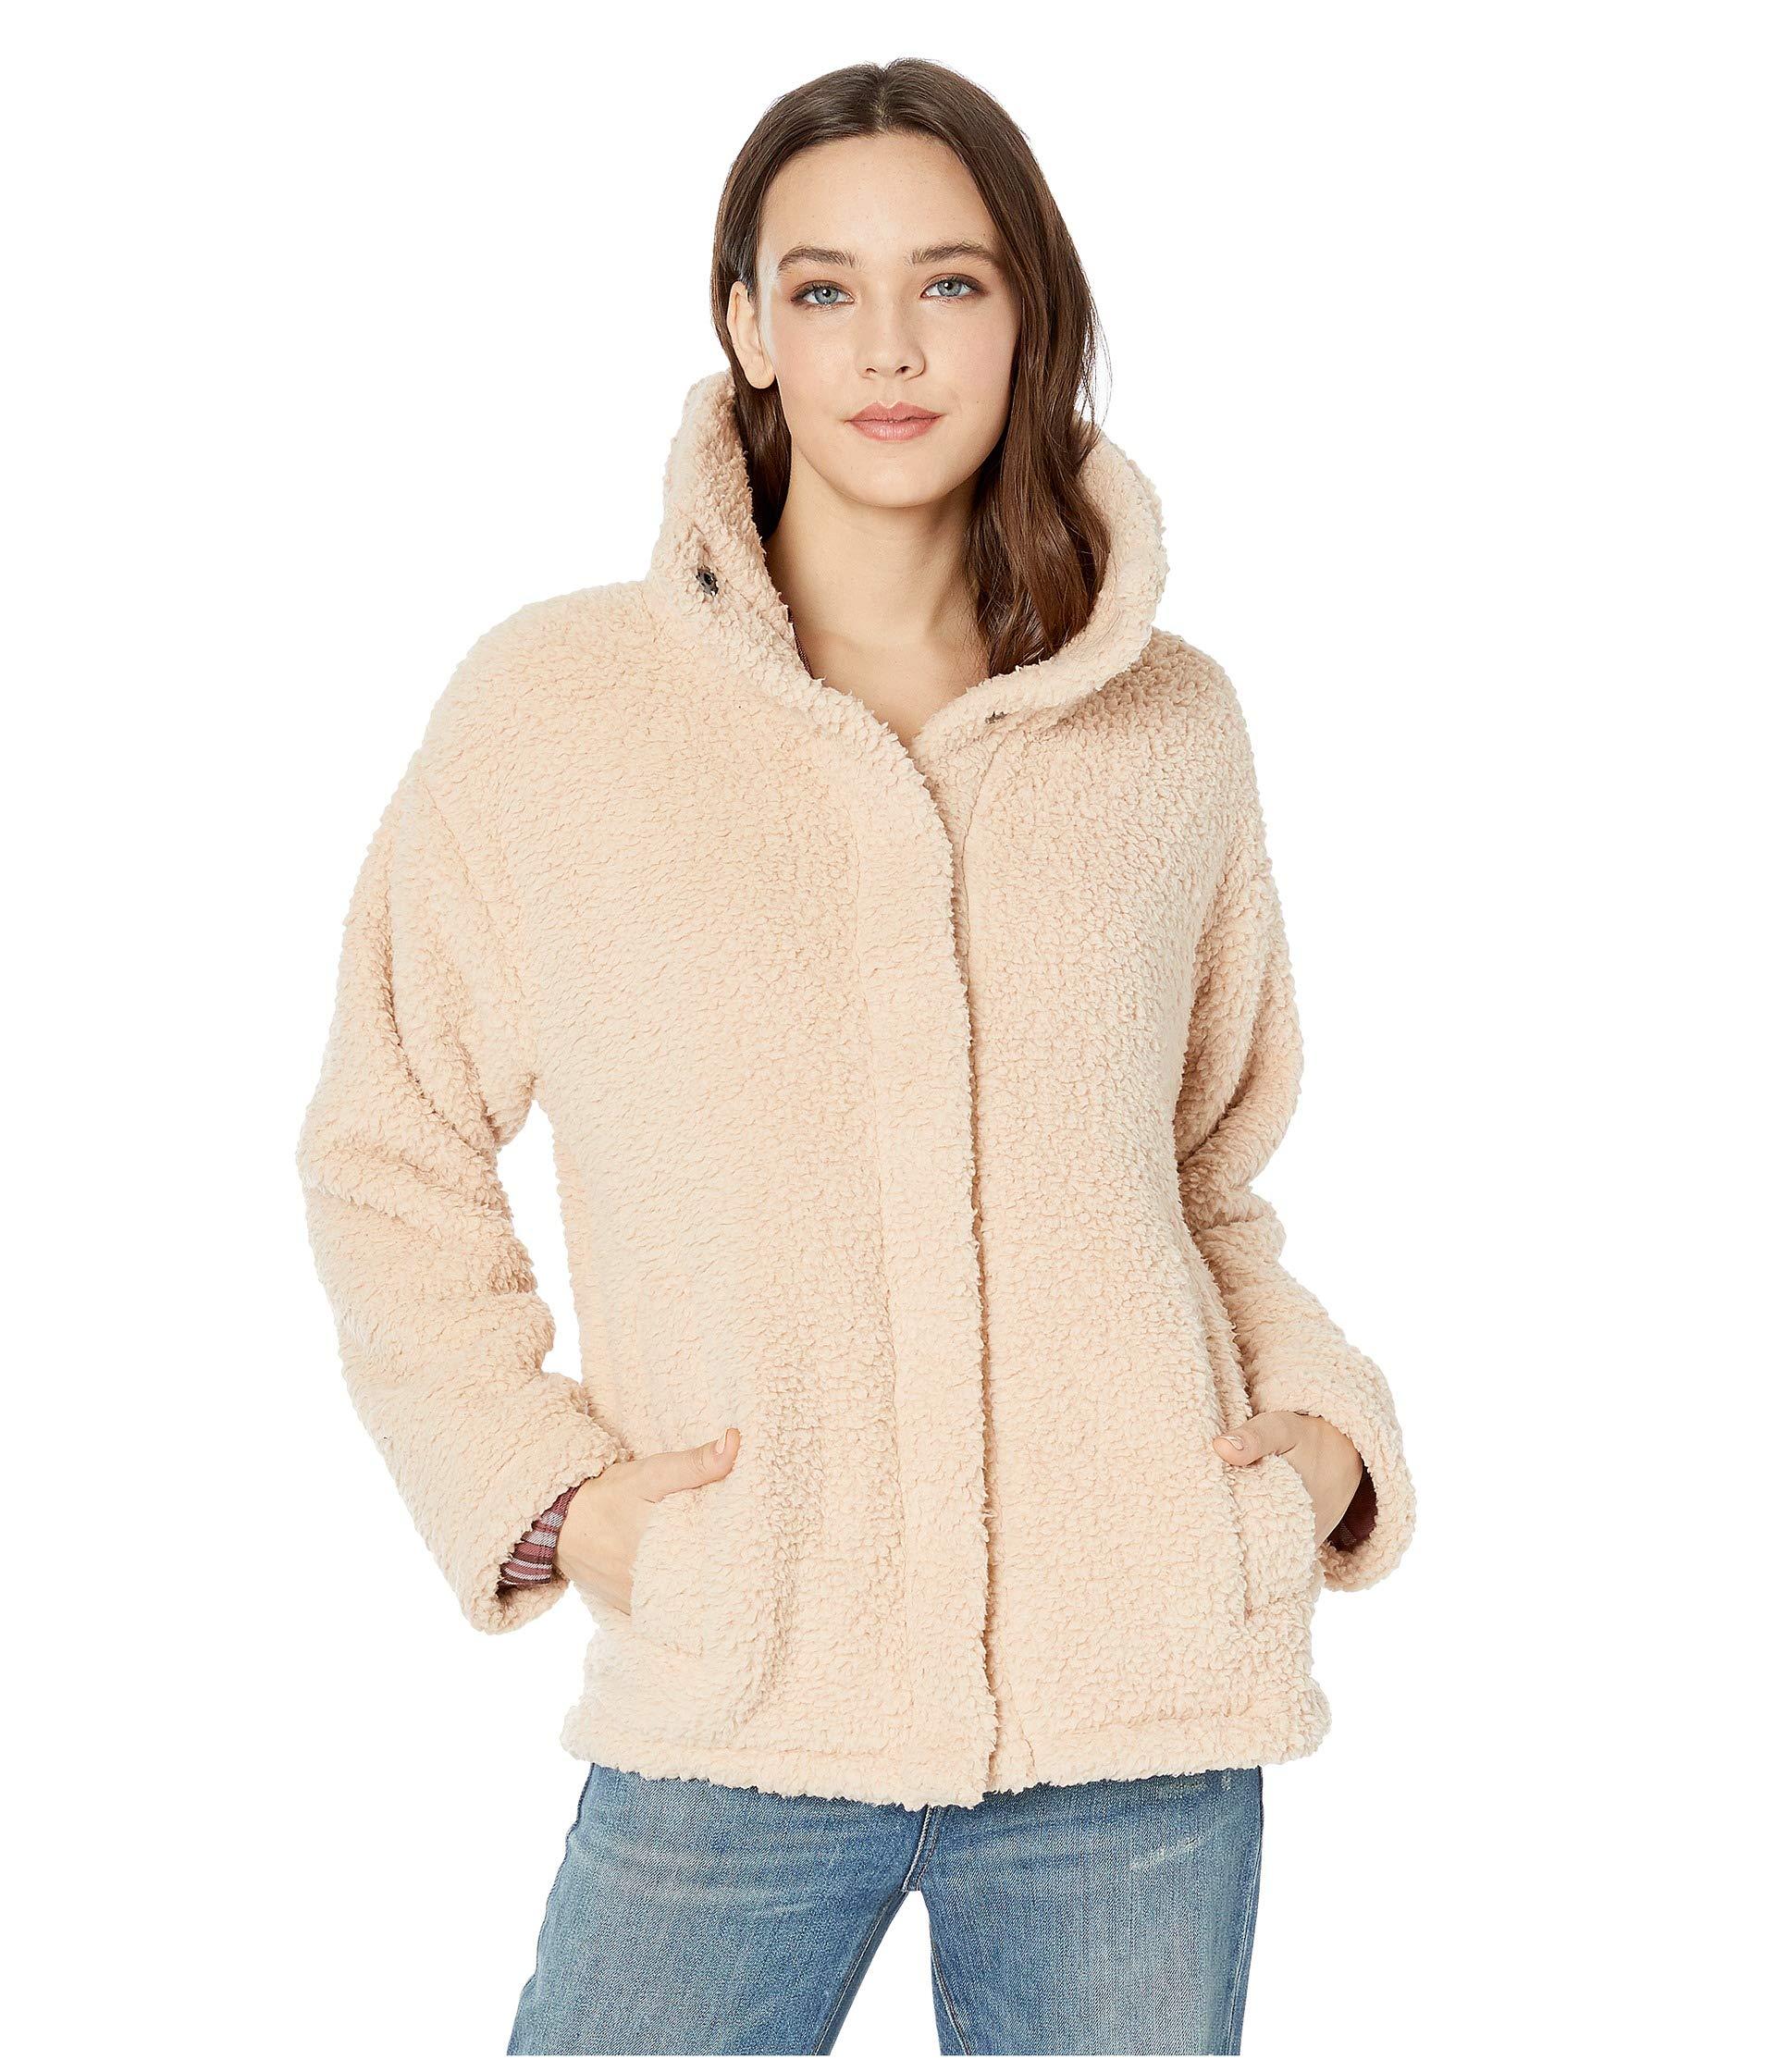 Billabong Synthetic Cozy Days Sherpa Jacket in White - Lyst